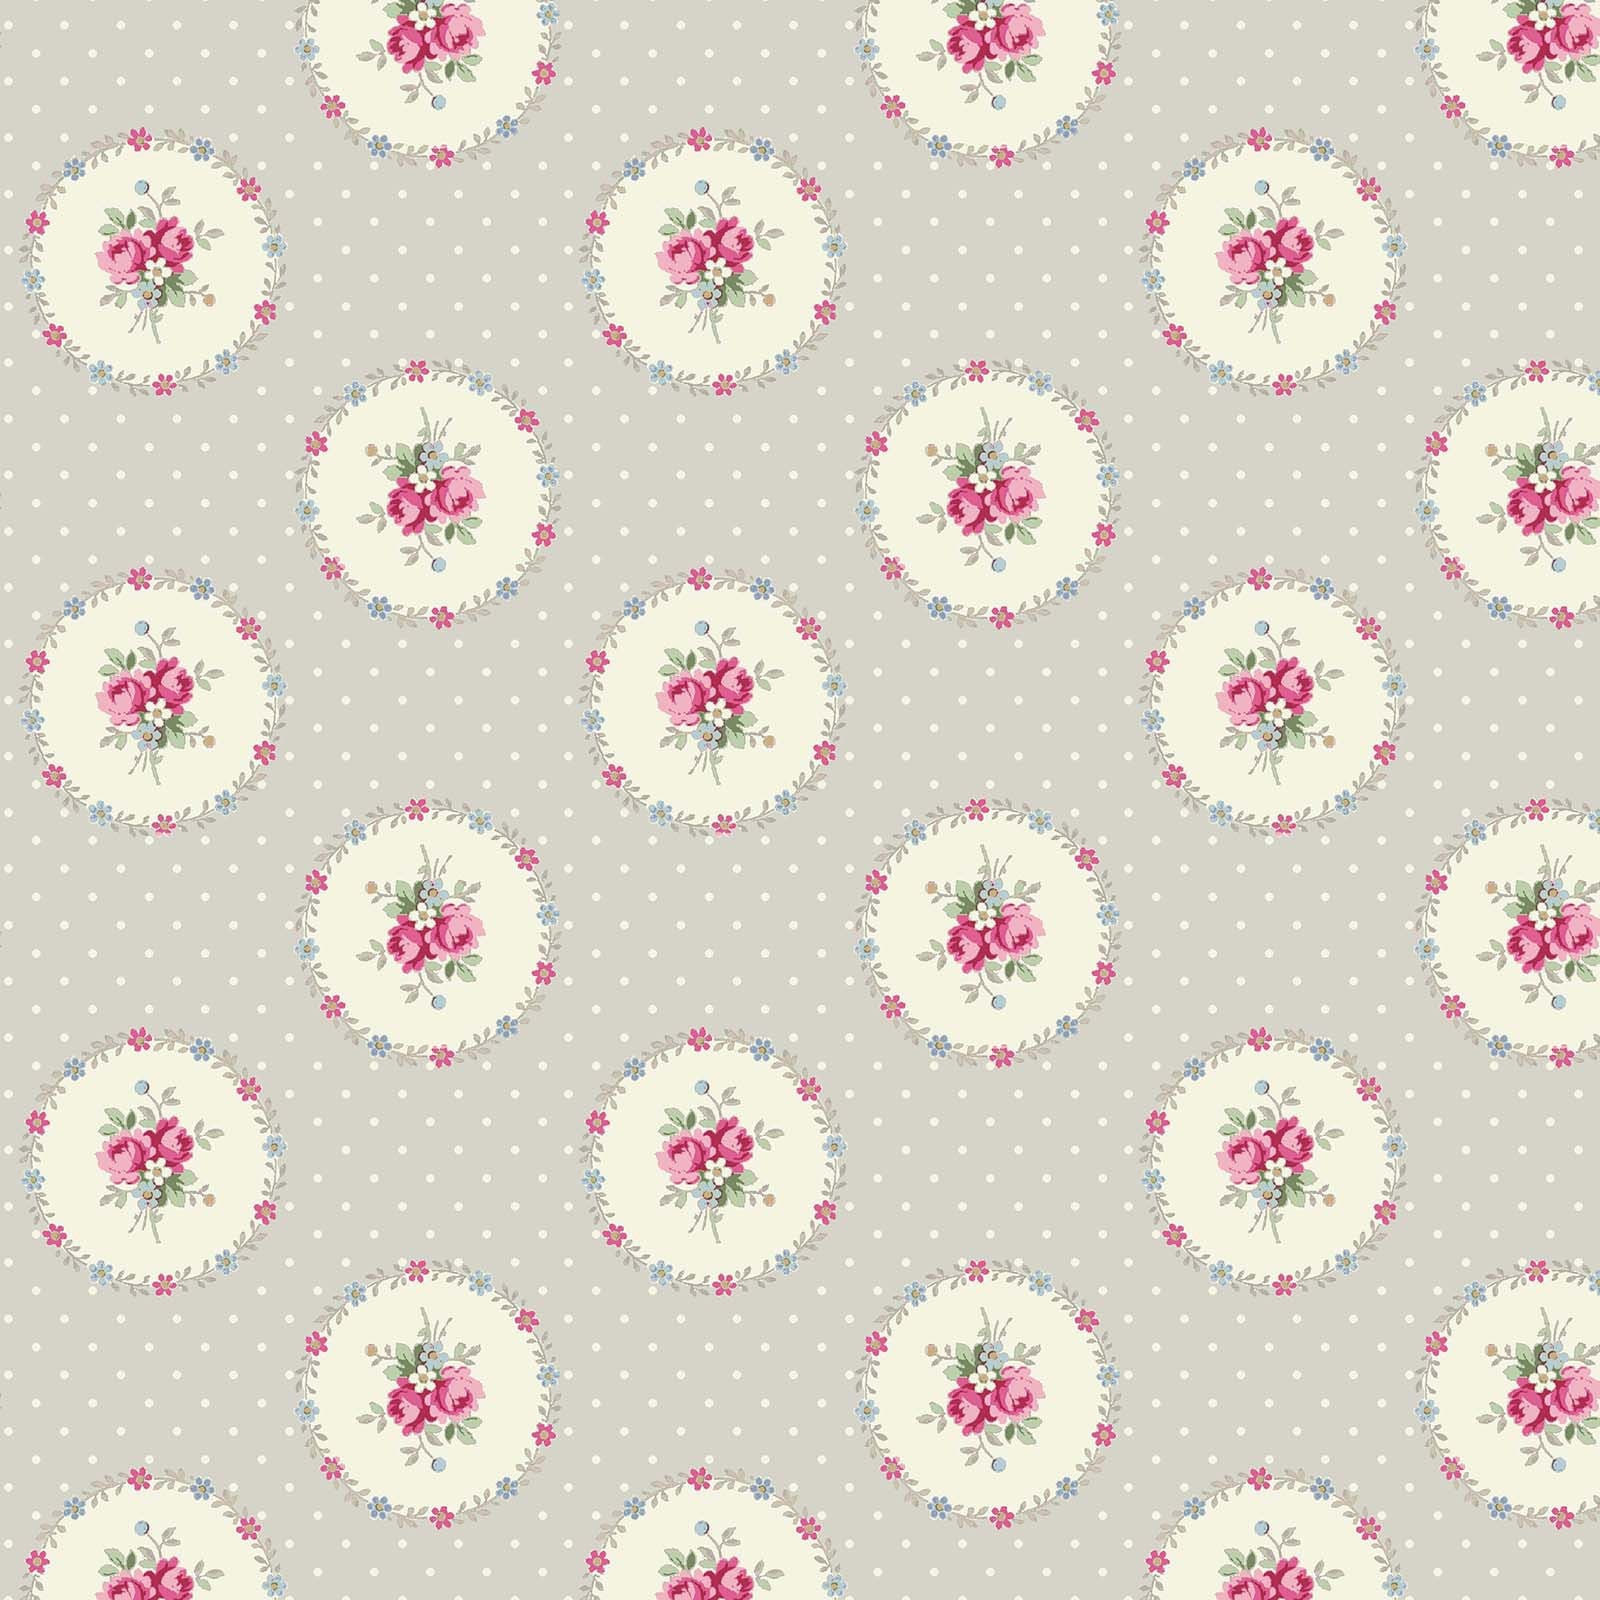 Ruru Rose Bouquet in Paris cotton fabric by Quilt Gate Ru2370-14B Circles of Roses on Gray